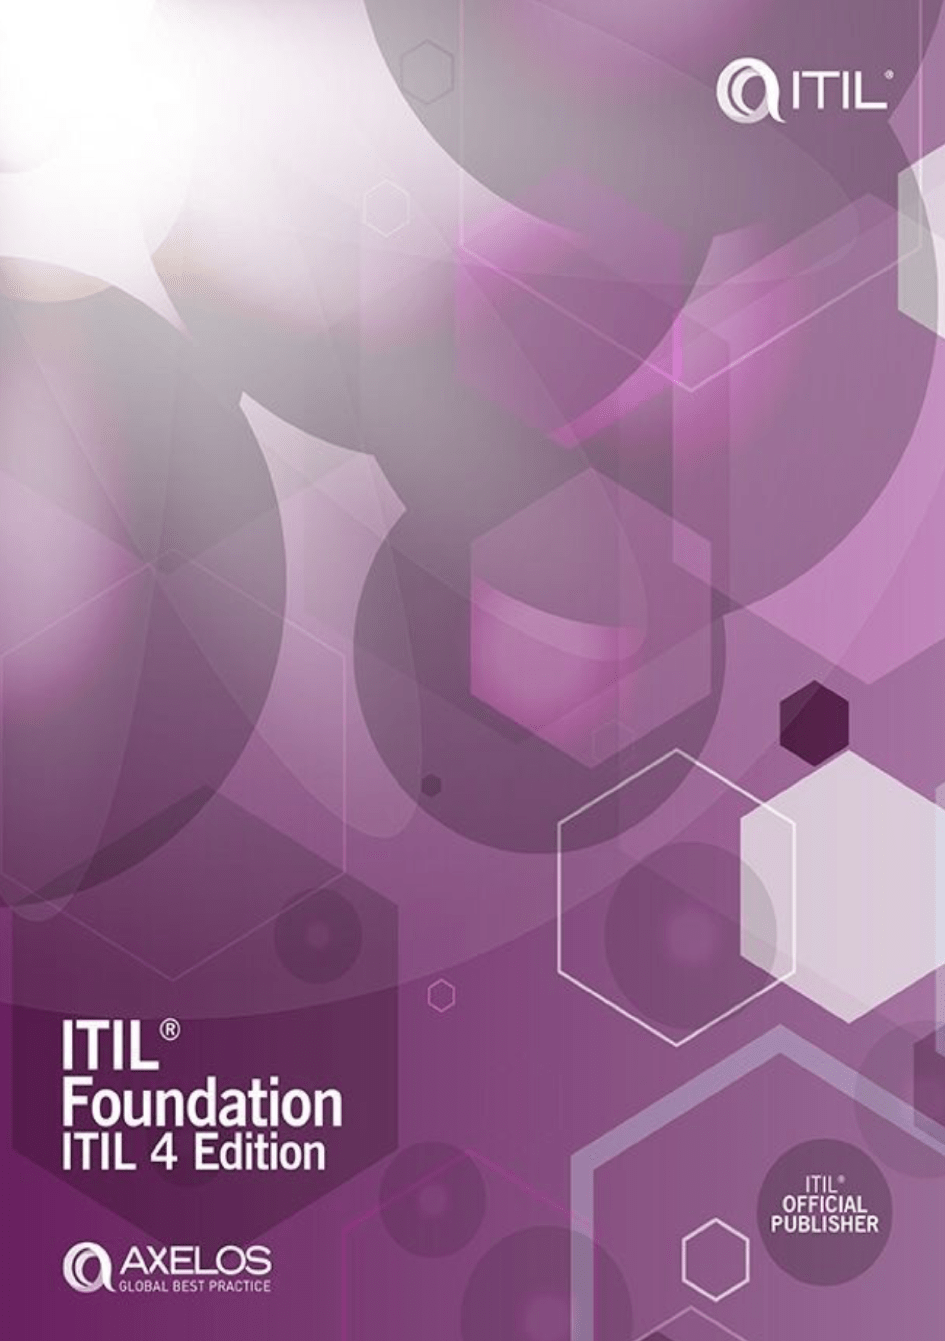 ITIL Foundation: 4th edition read online at BusinessBooks.cc